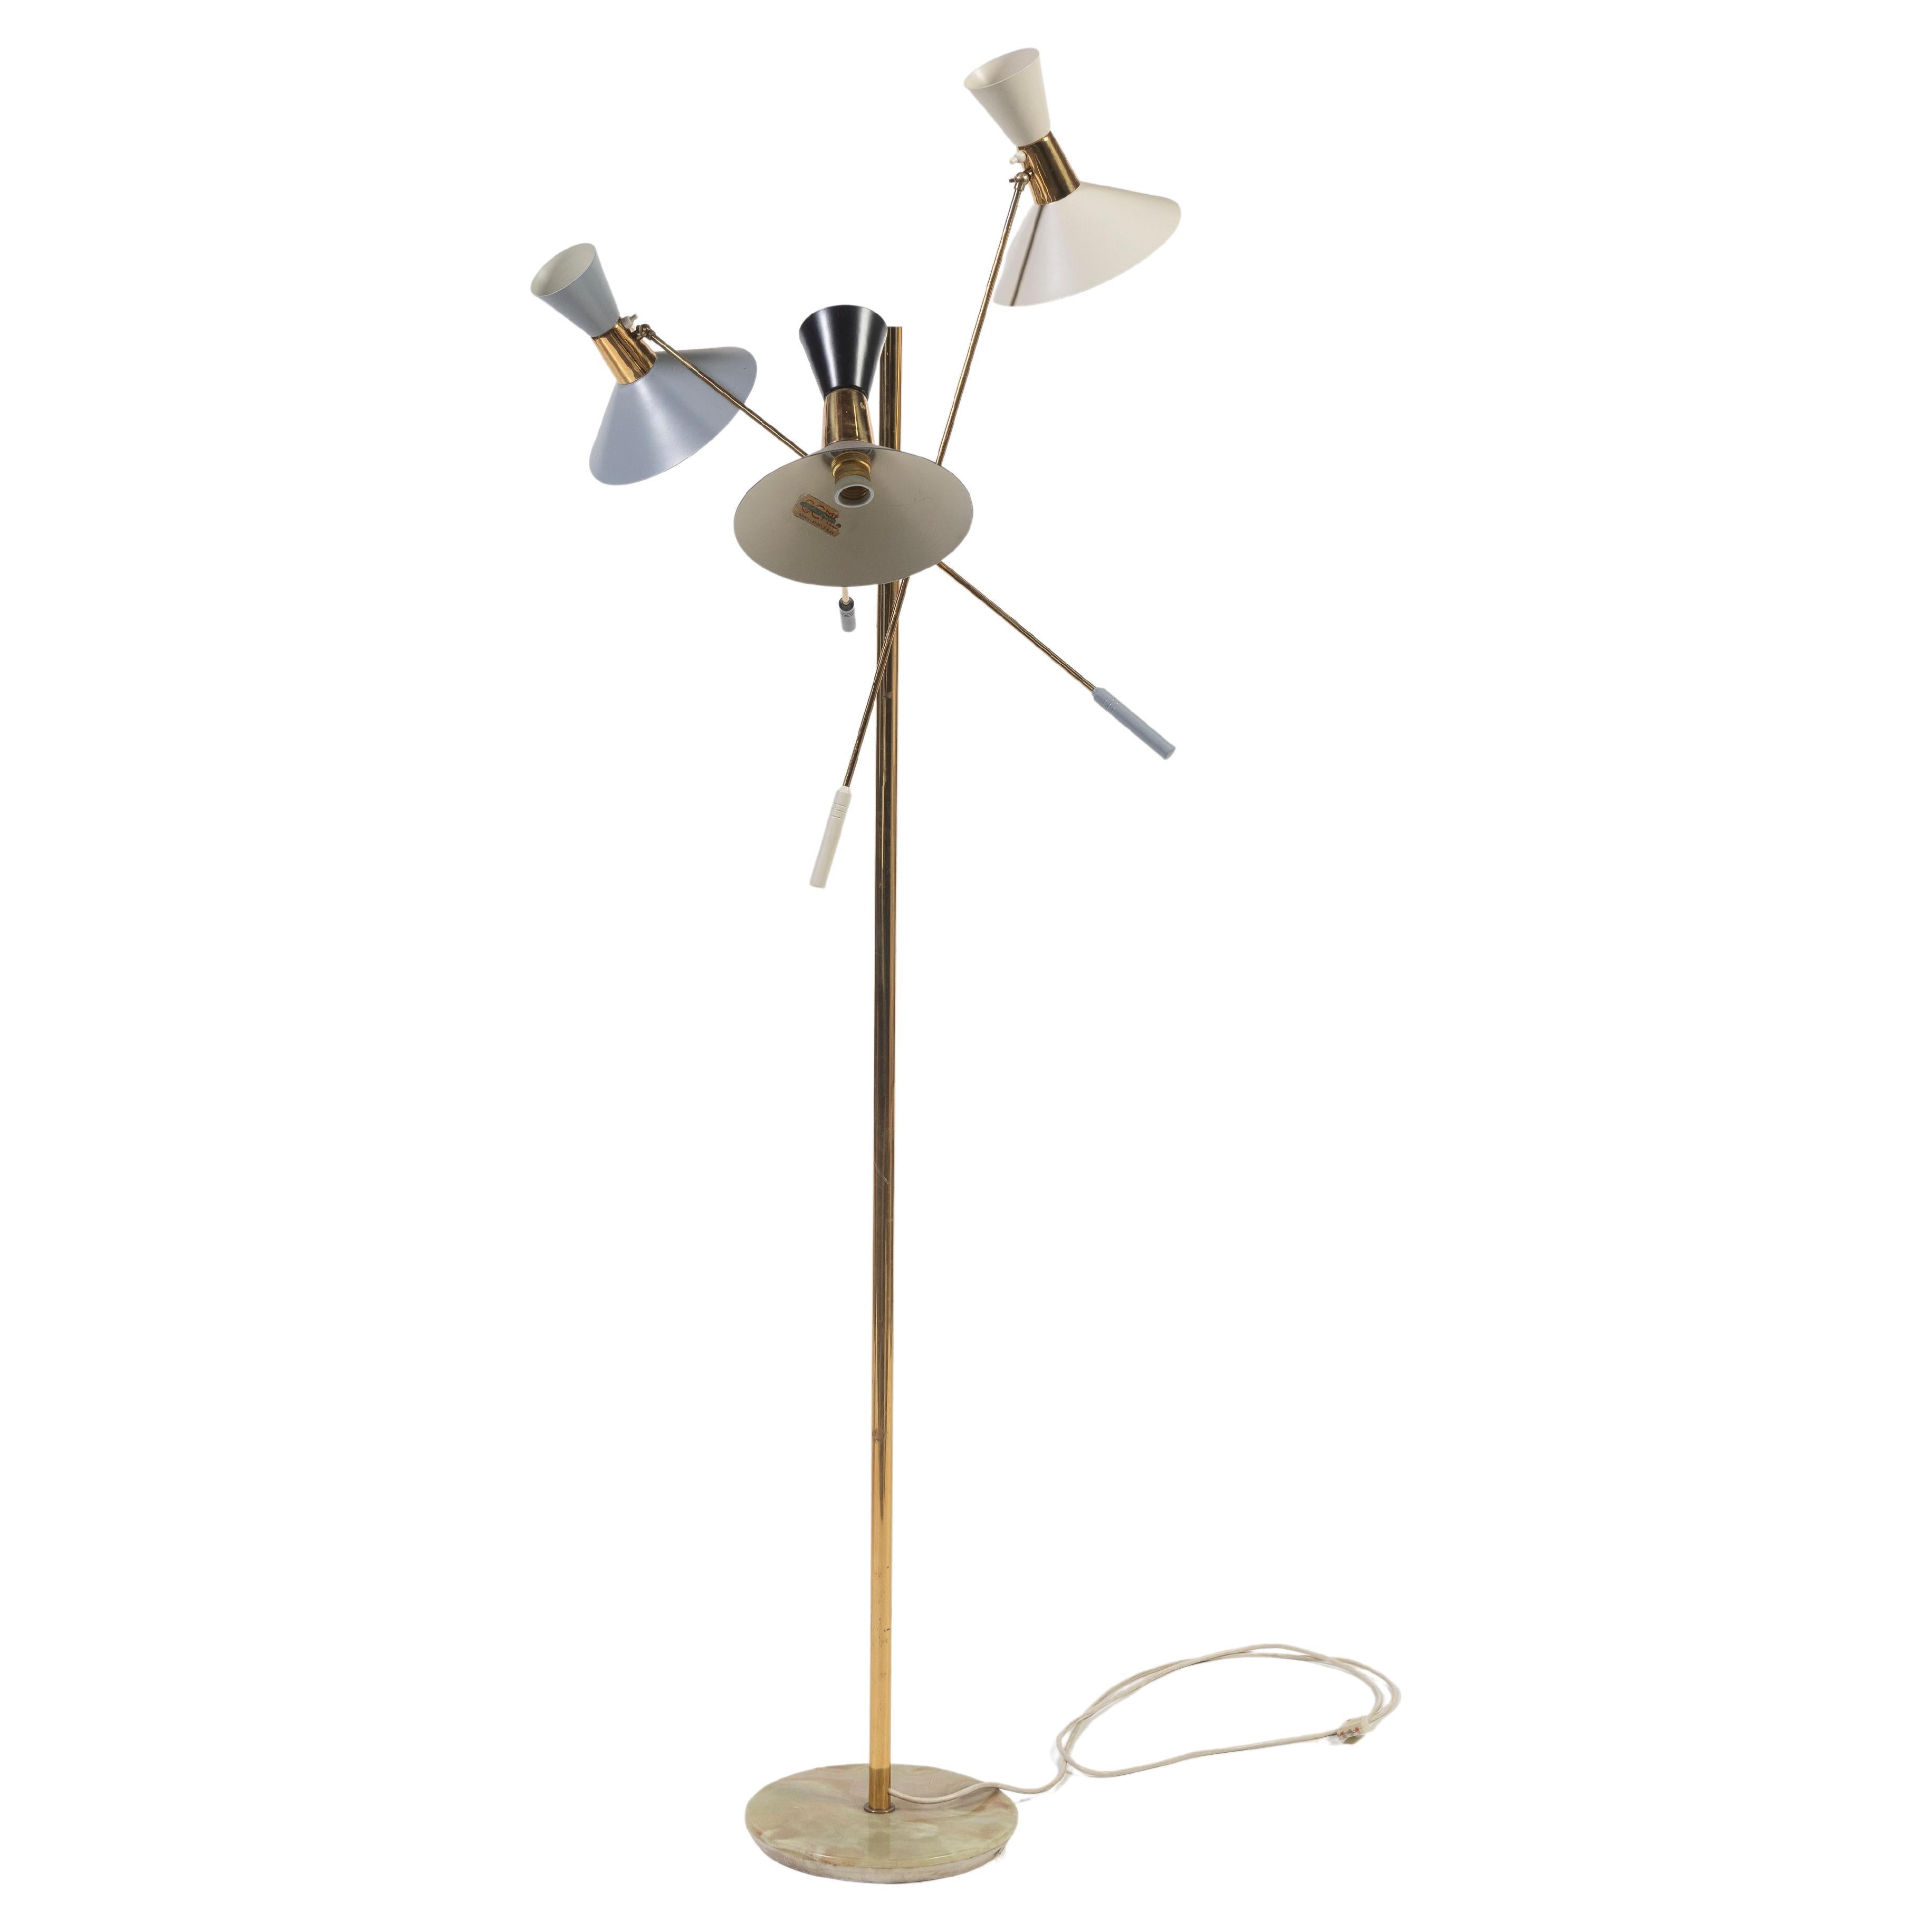 A favorite among lovers of Mid-Century Modern design, this iconic floor lamp is in very good condition. Made in Italy by G.C.M.E. (label visible in photos), the fixture has three adjustable brass arms, and three lacquered aluminum shades in black,